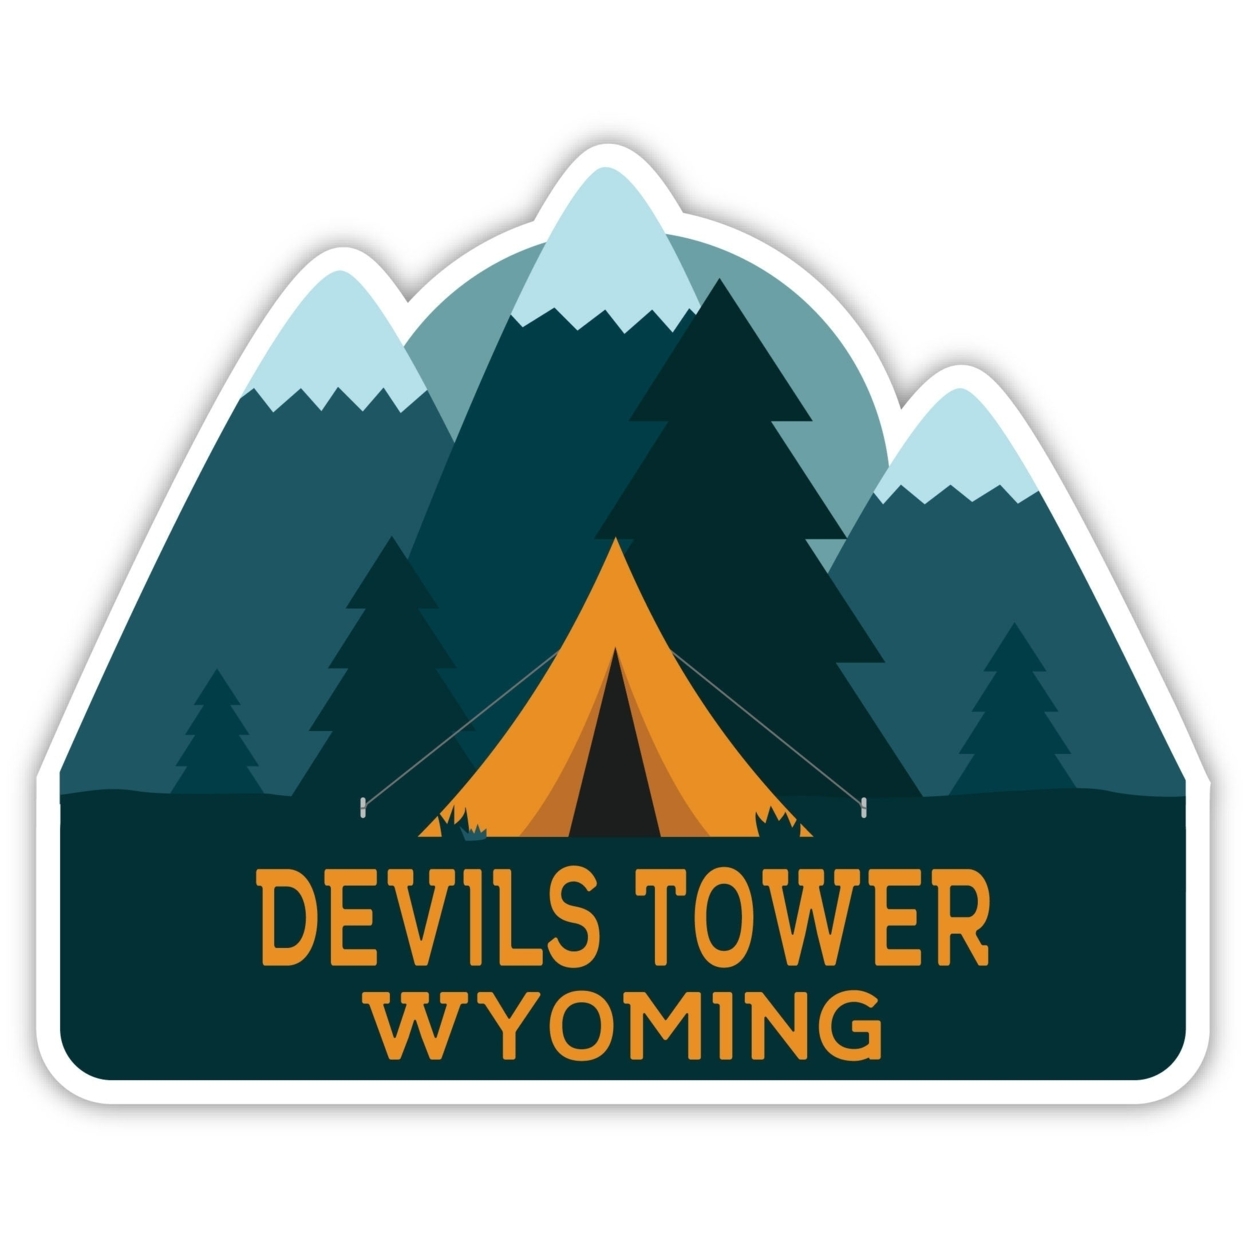 Devils Tower Wyoming Souvenir Decorative Stickers (Choose Theme And Size) - 4-Pack, 2-Inch, Bear